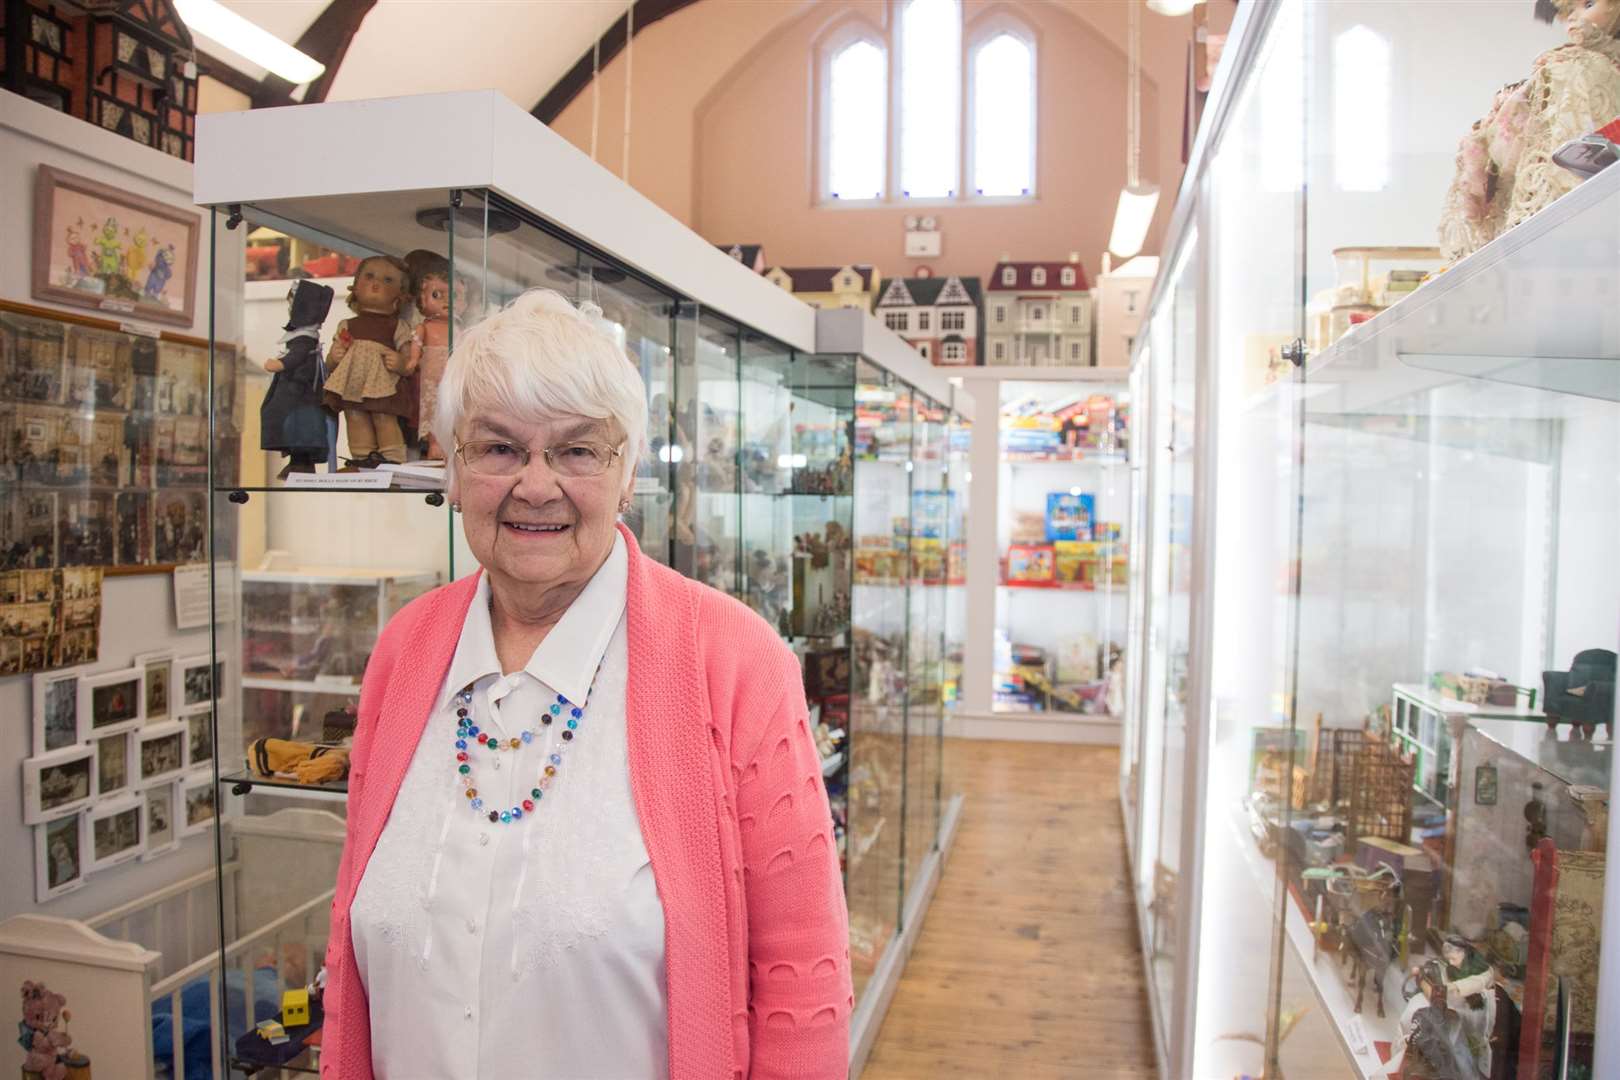 Emily Innes has opened a new toy and dollhouse museum in the former Methodist Church in Banff. Picture: Becky Saunderson.